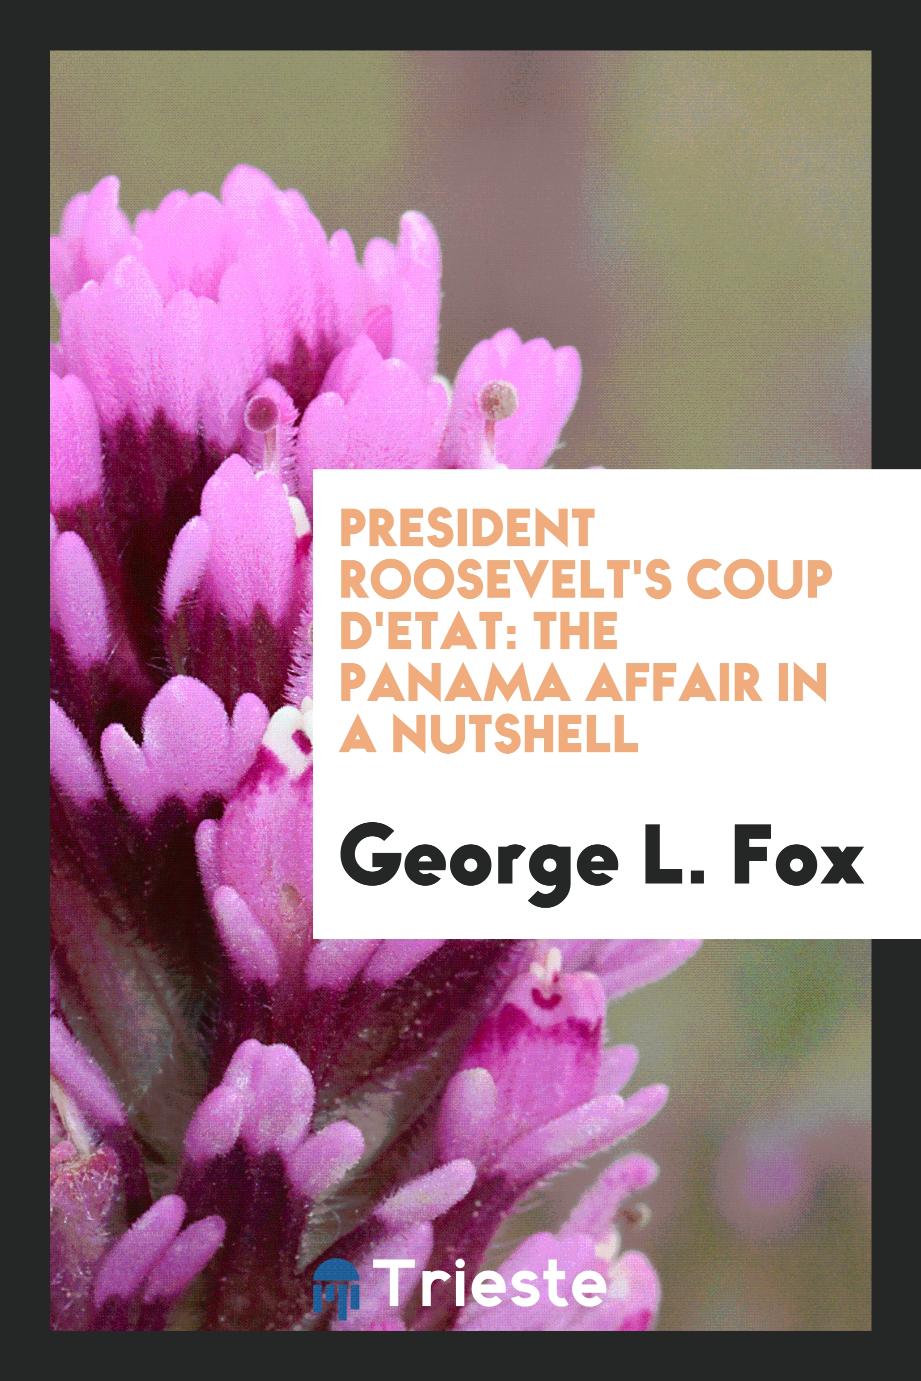 President Roosevelt's Coup D'etat: The Panama Affair in a Nutshell